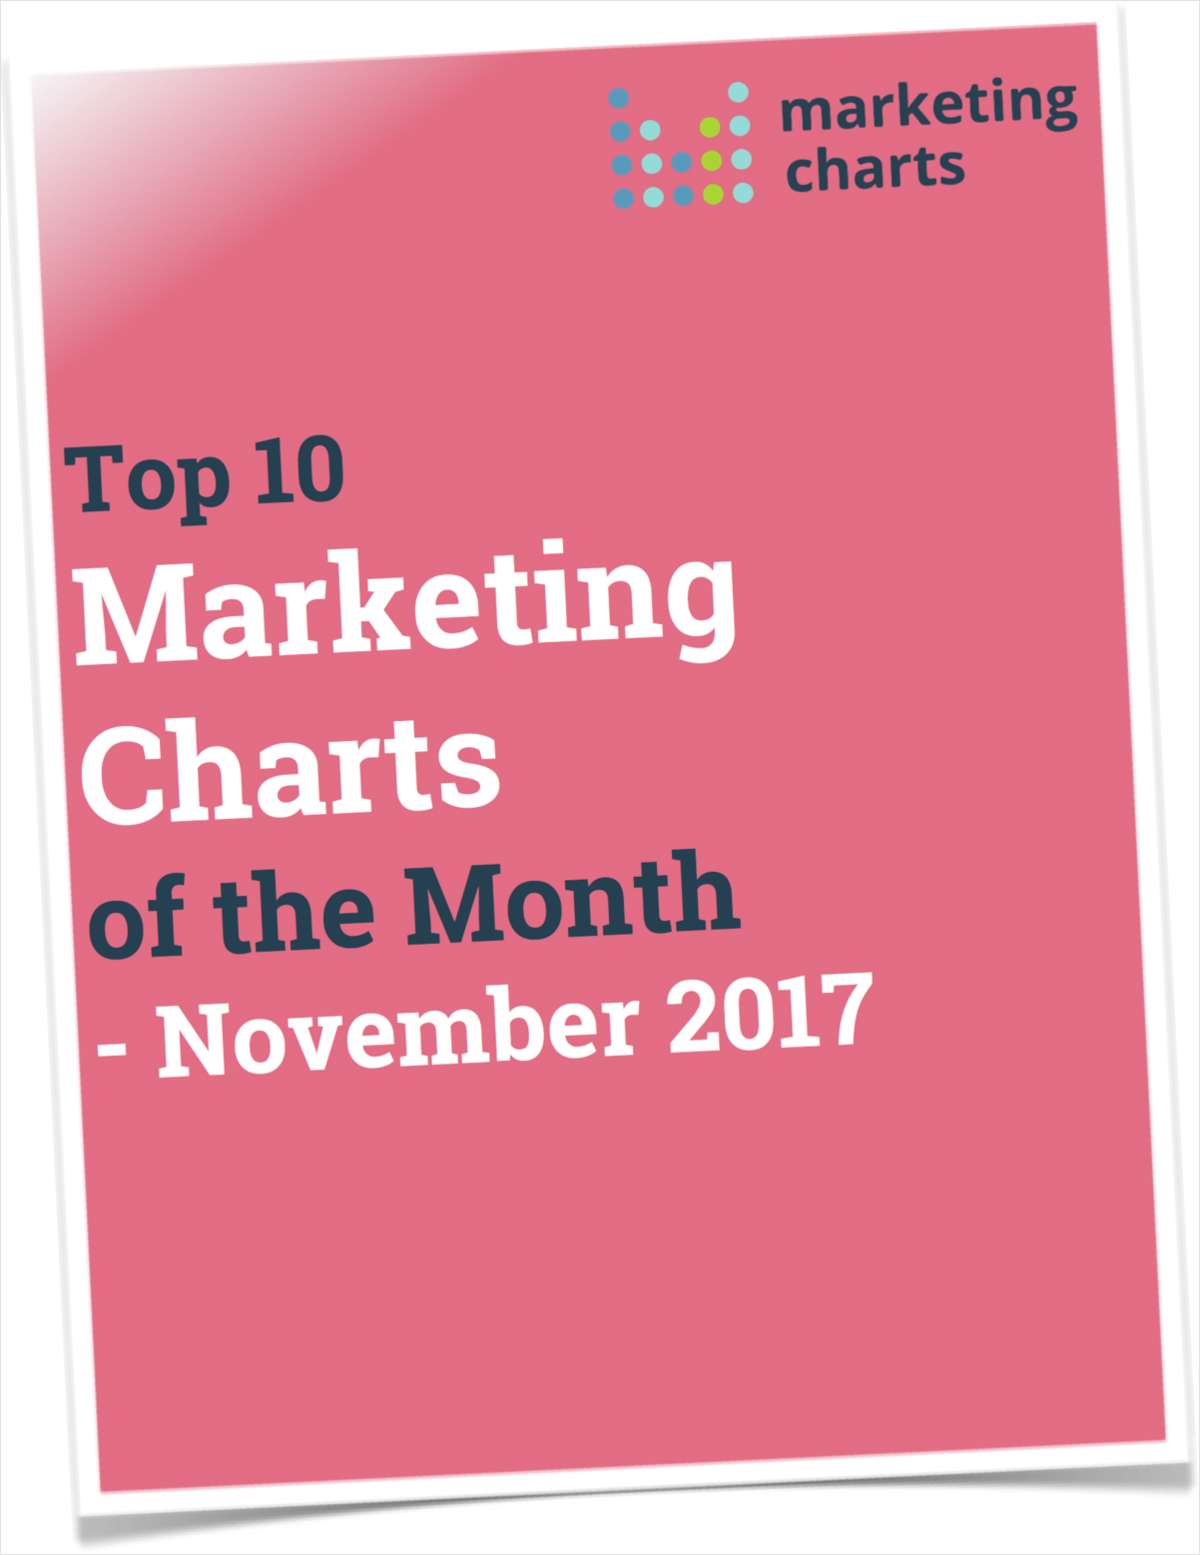 Top 10 Marketing Charts of the Month - November 2017